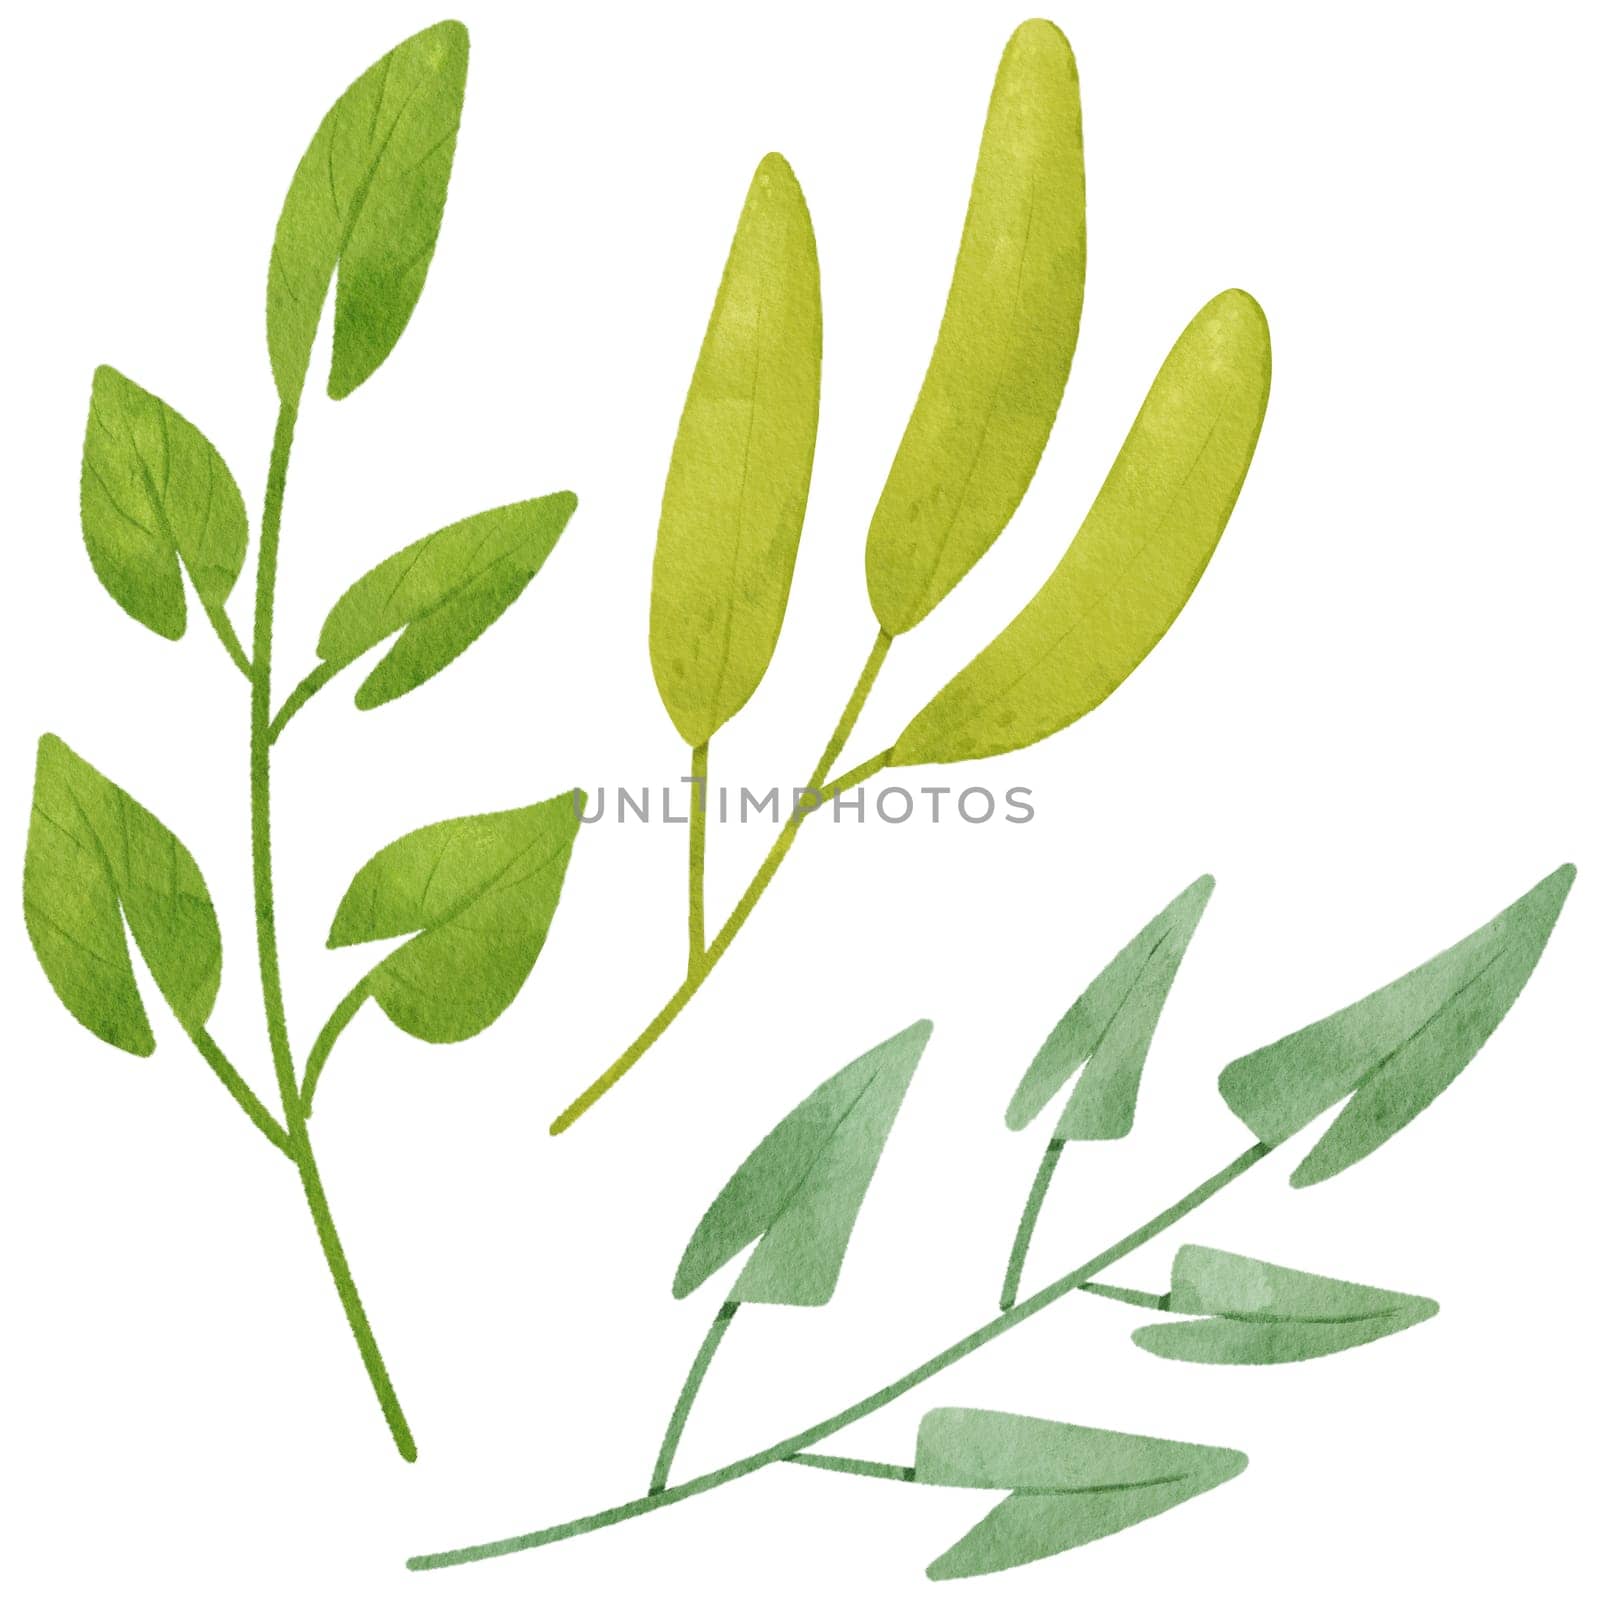 green branches captured in watercolor with a whimsical, cartoon-style touch. illustration is perfect for children's books, greeting cards, and various creative projects.